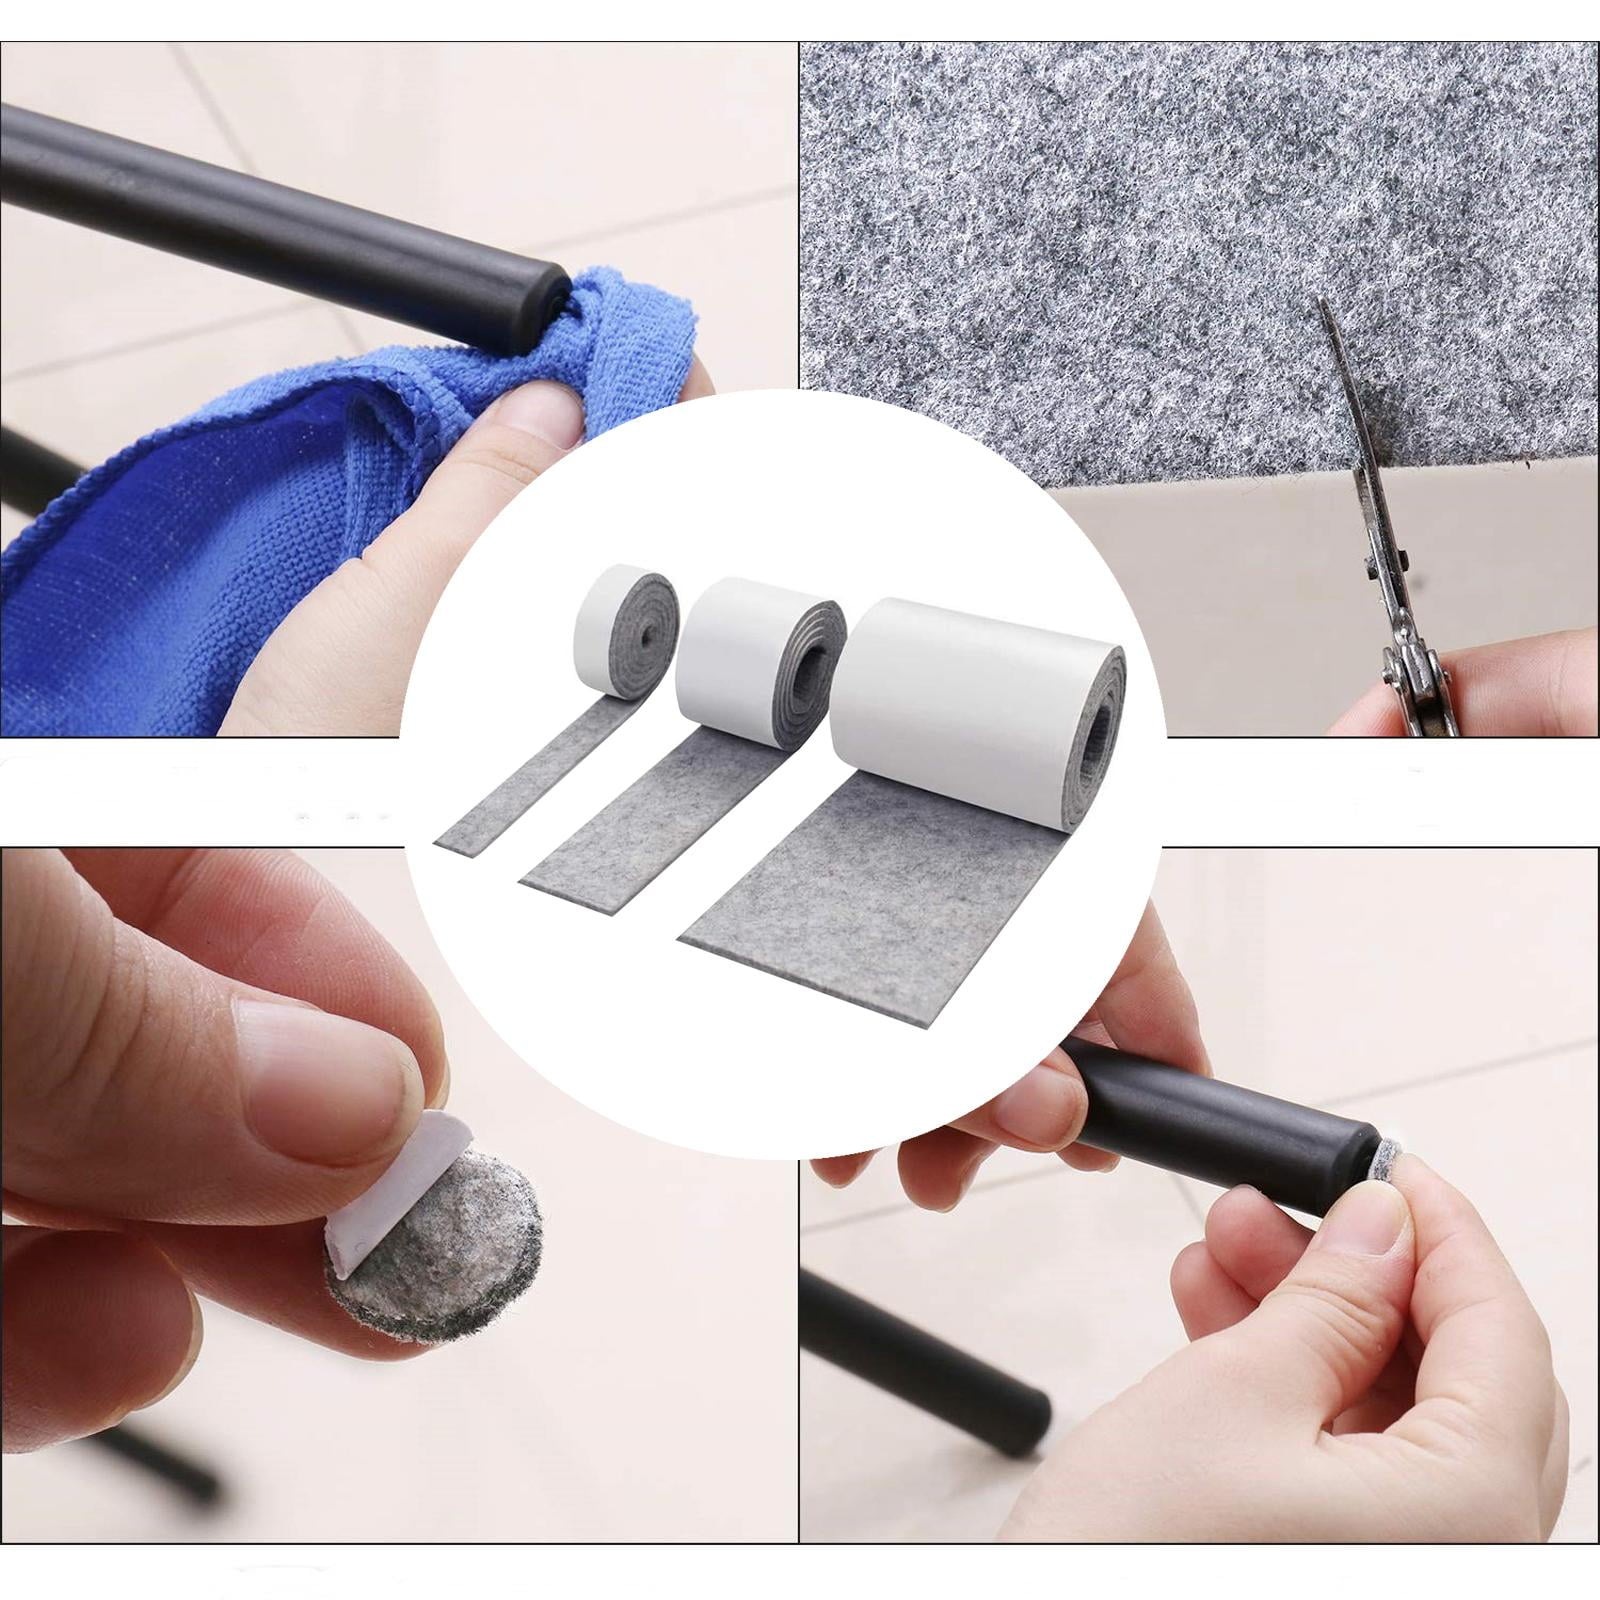 3 Packs Heavy Duty Felt Strip Roll with Adhesive Backing Self Adhesive Felt Tape Light Gray, Size: No Spool Device